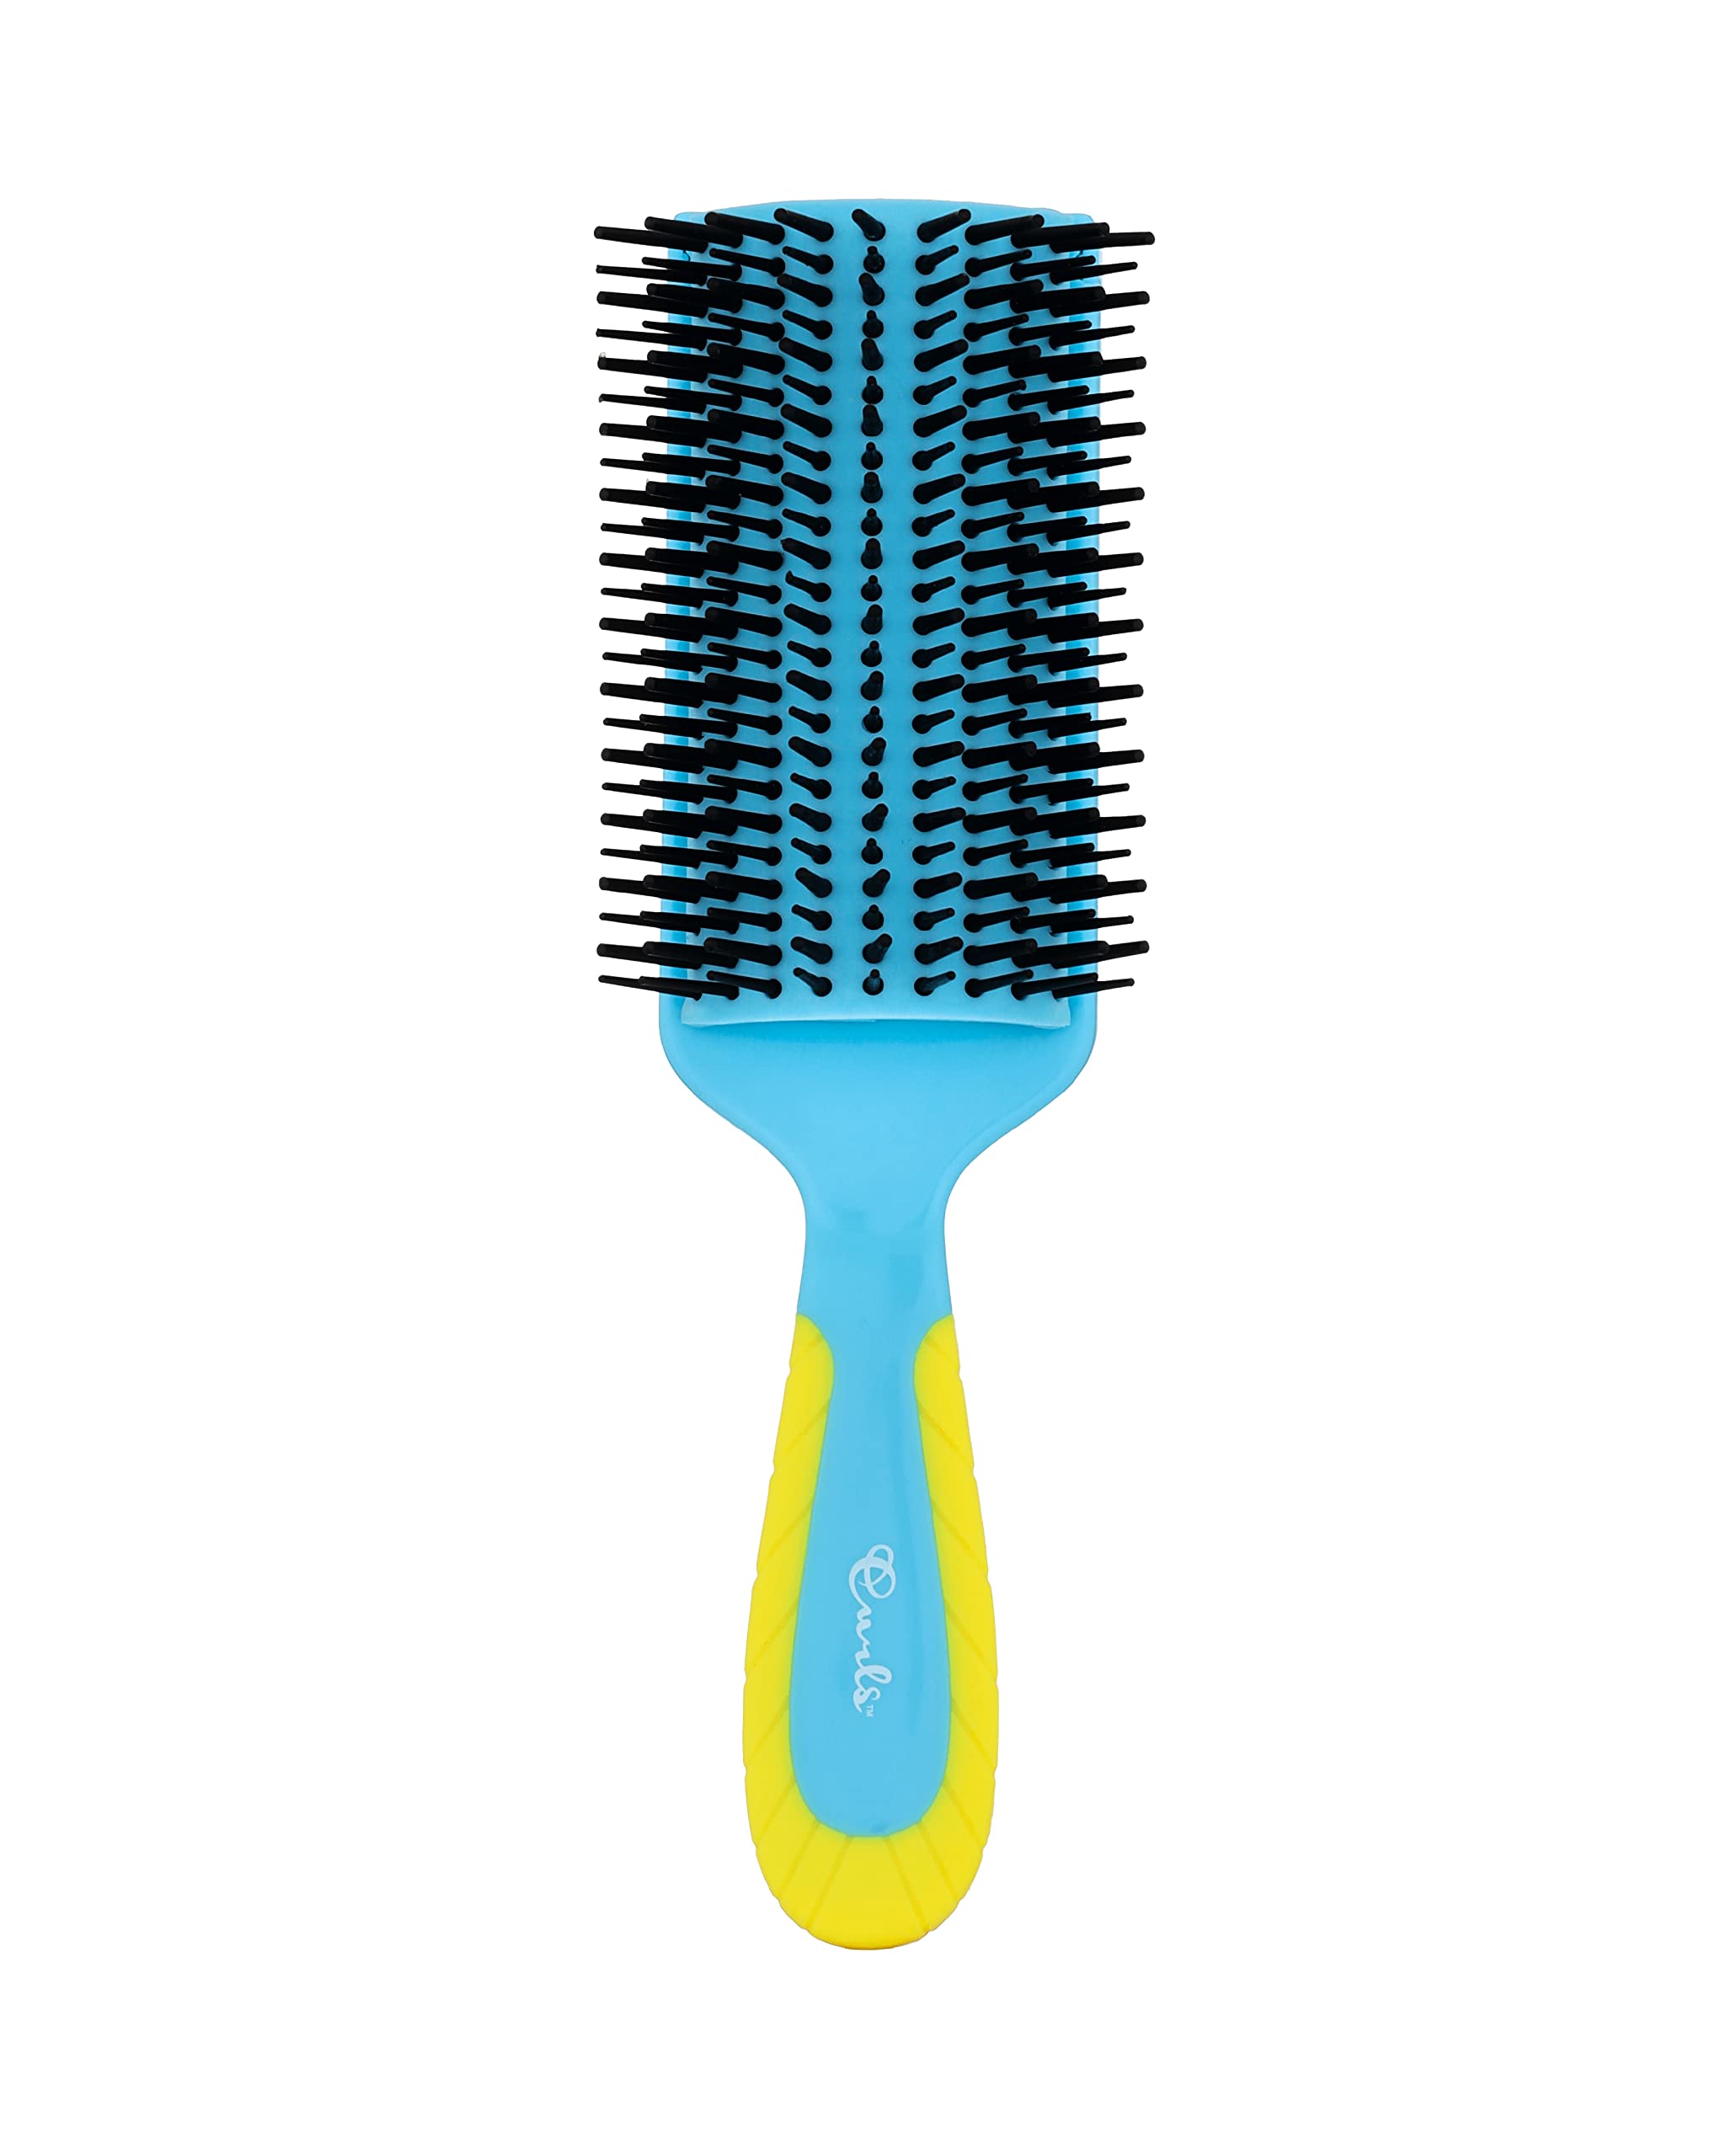 CURLS Styling Tools Ultimate Detangler Brush - Customizable Bristles for Thin or Thick Hair - For All Curl Types and Patterns,1CT